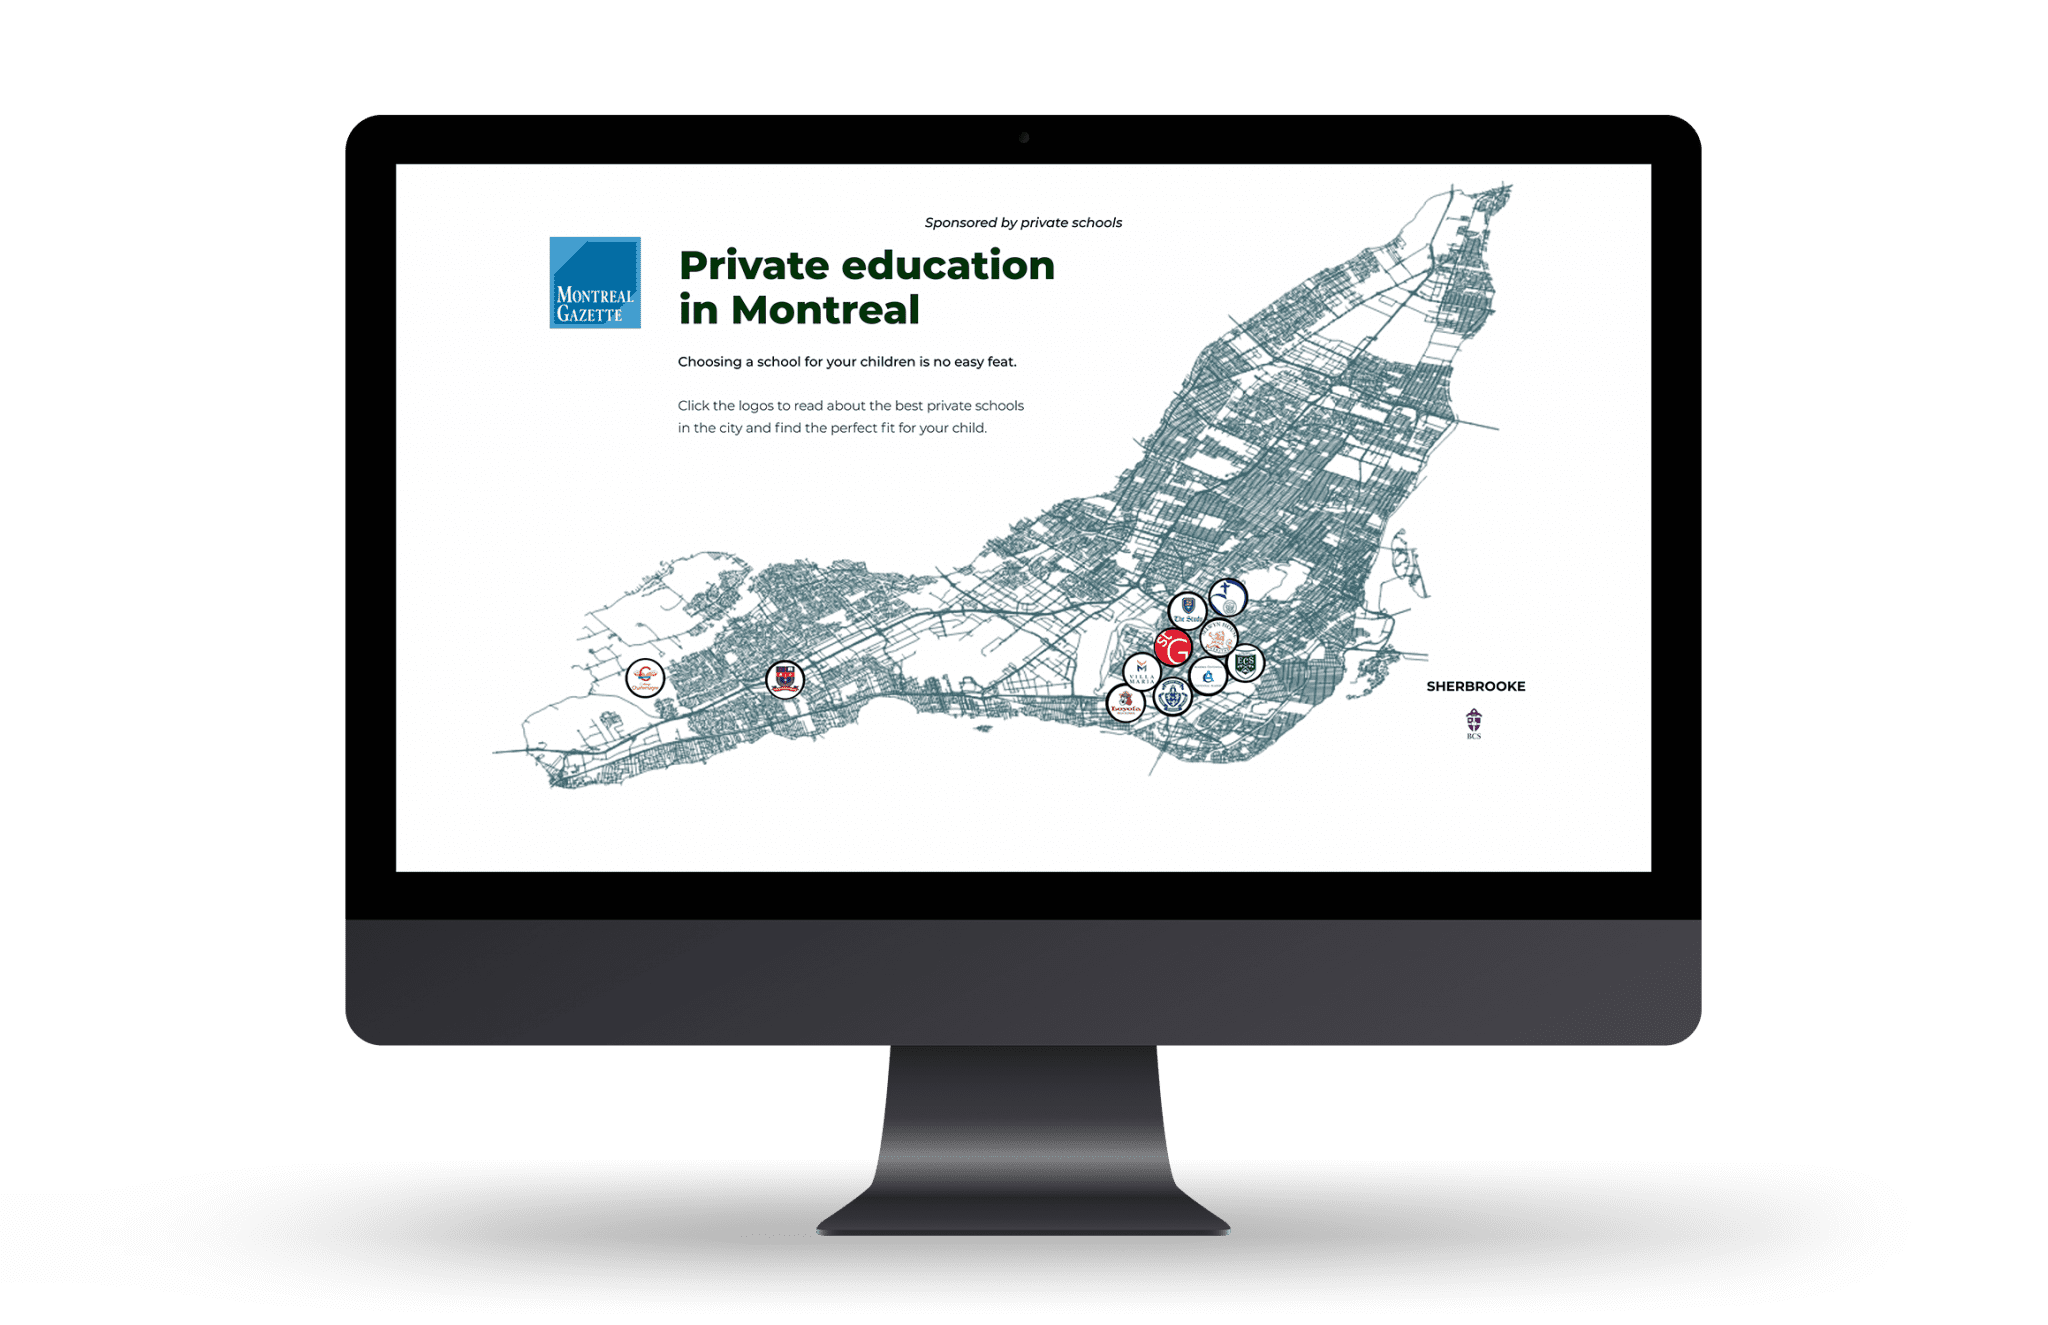 Private schools of Montreal sponsored content shown on a desktop computer